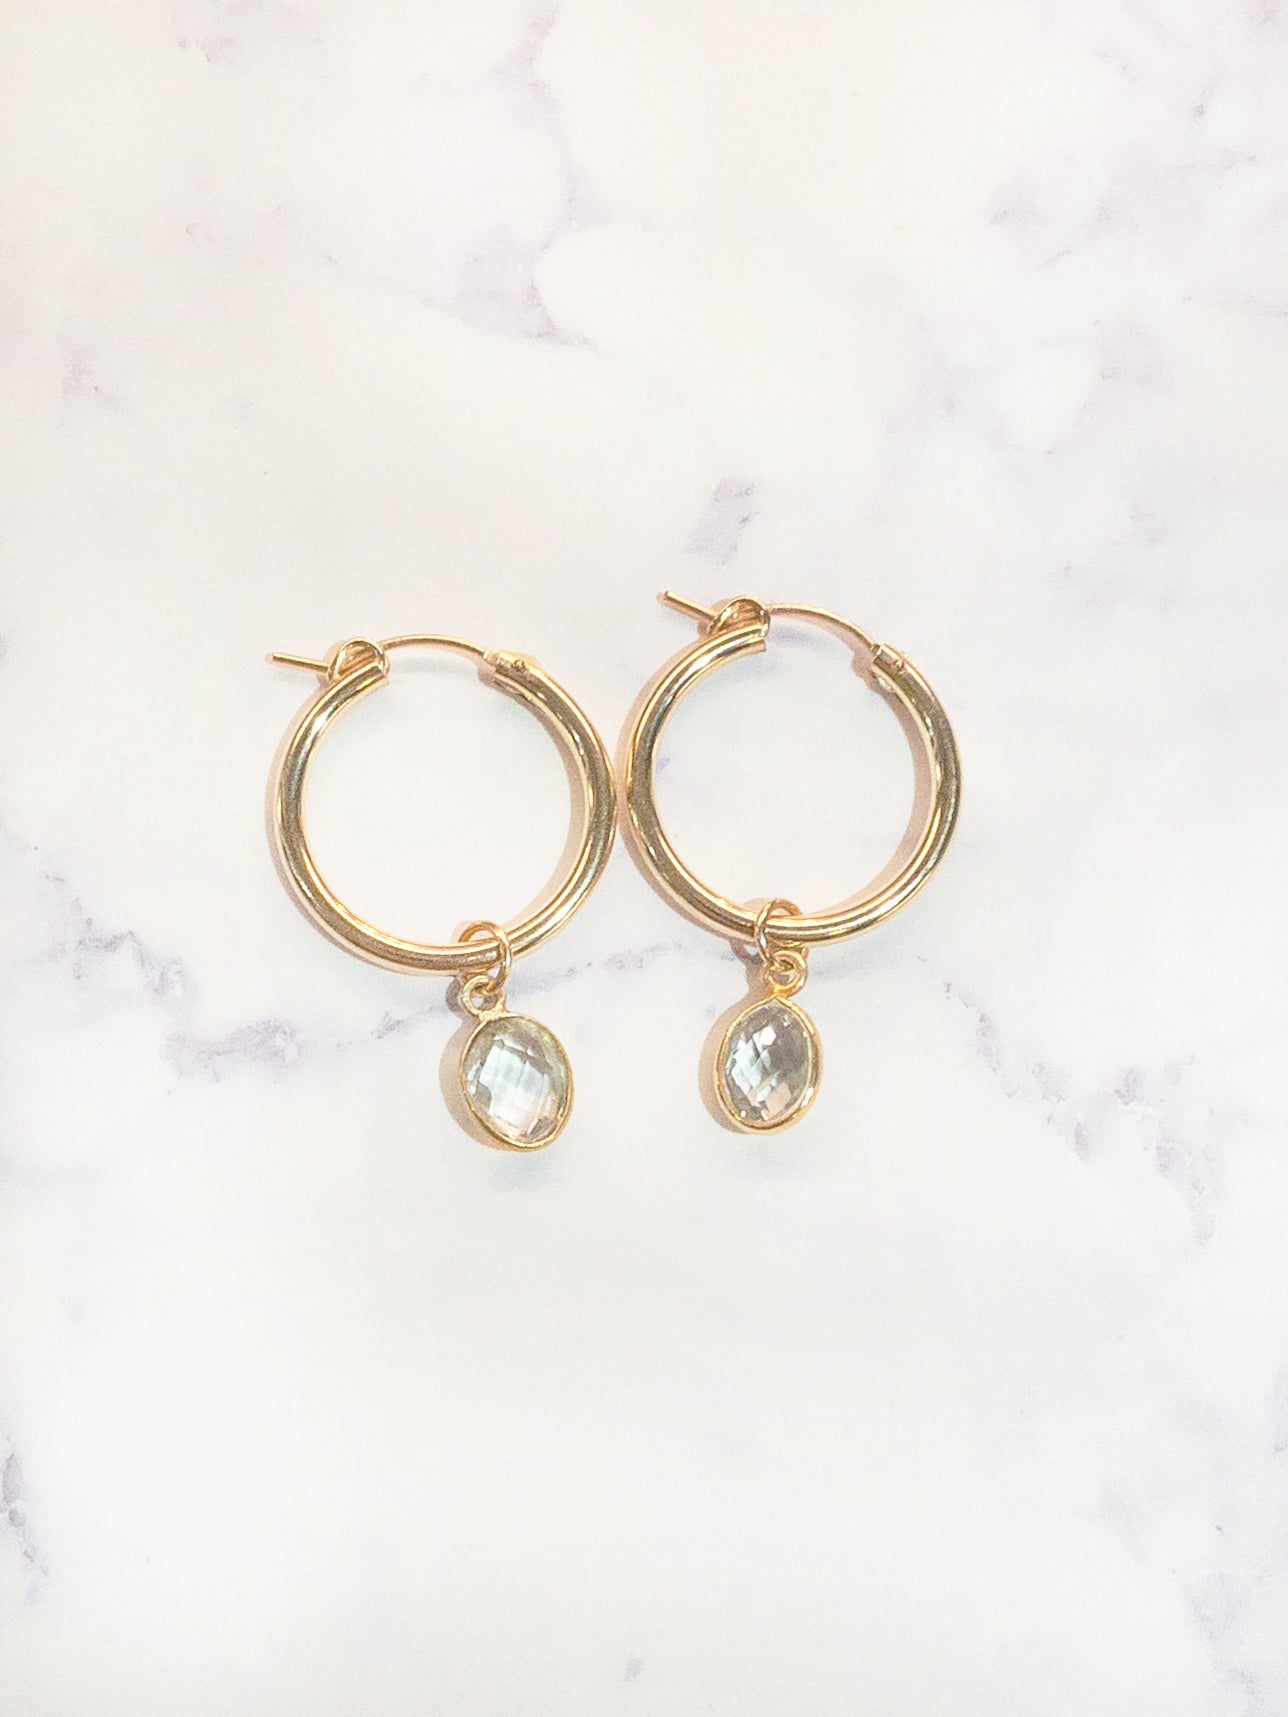 Gold Filled Hoops with Green Amethyst Gemstone